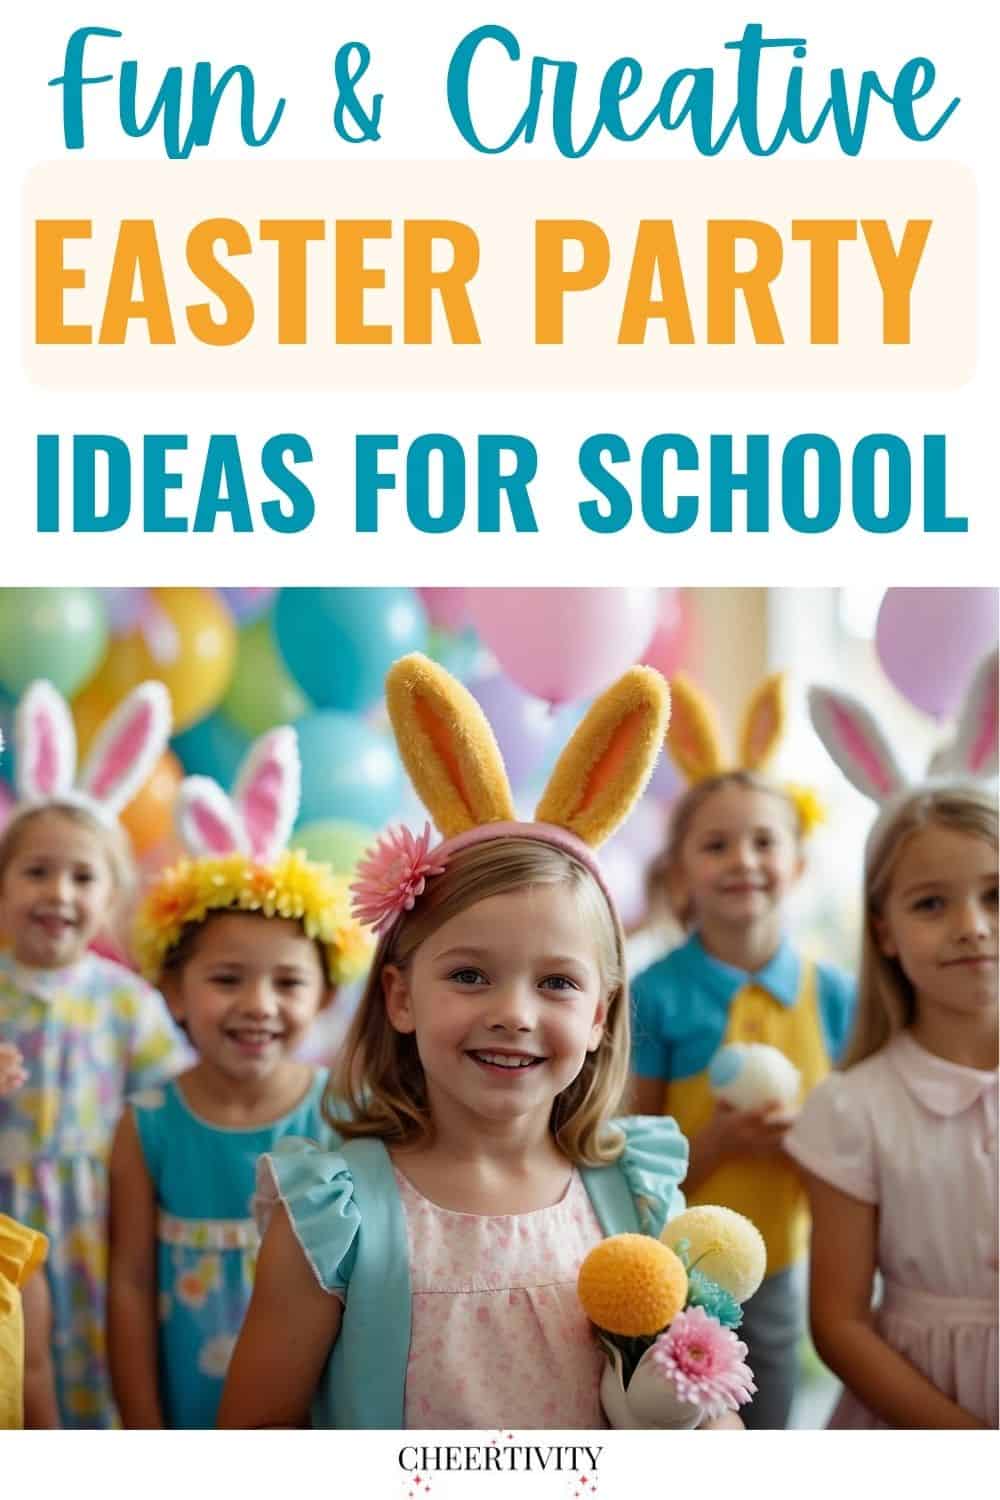 Fun Easter Party Ideas for School